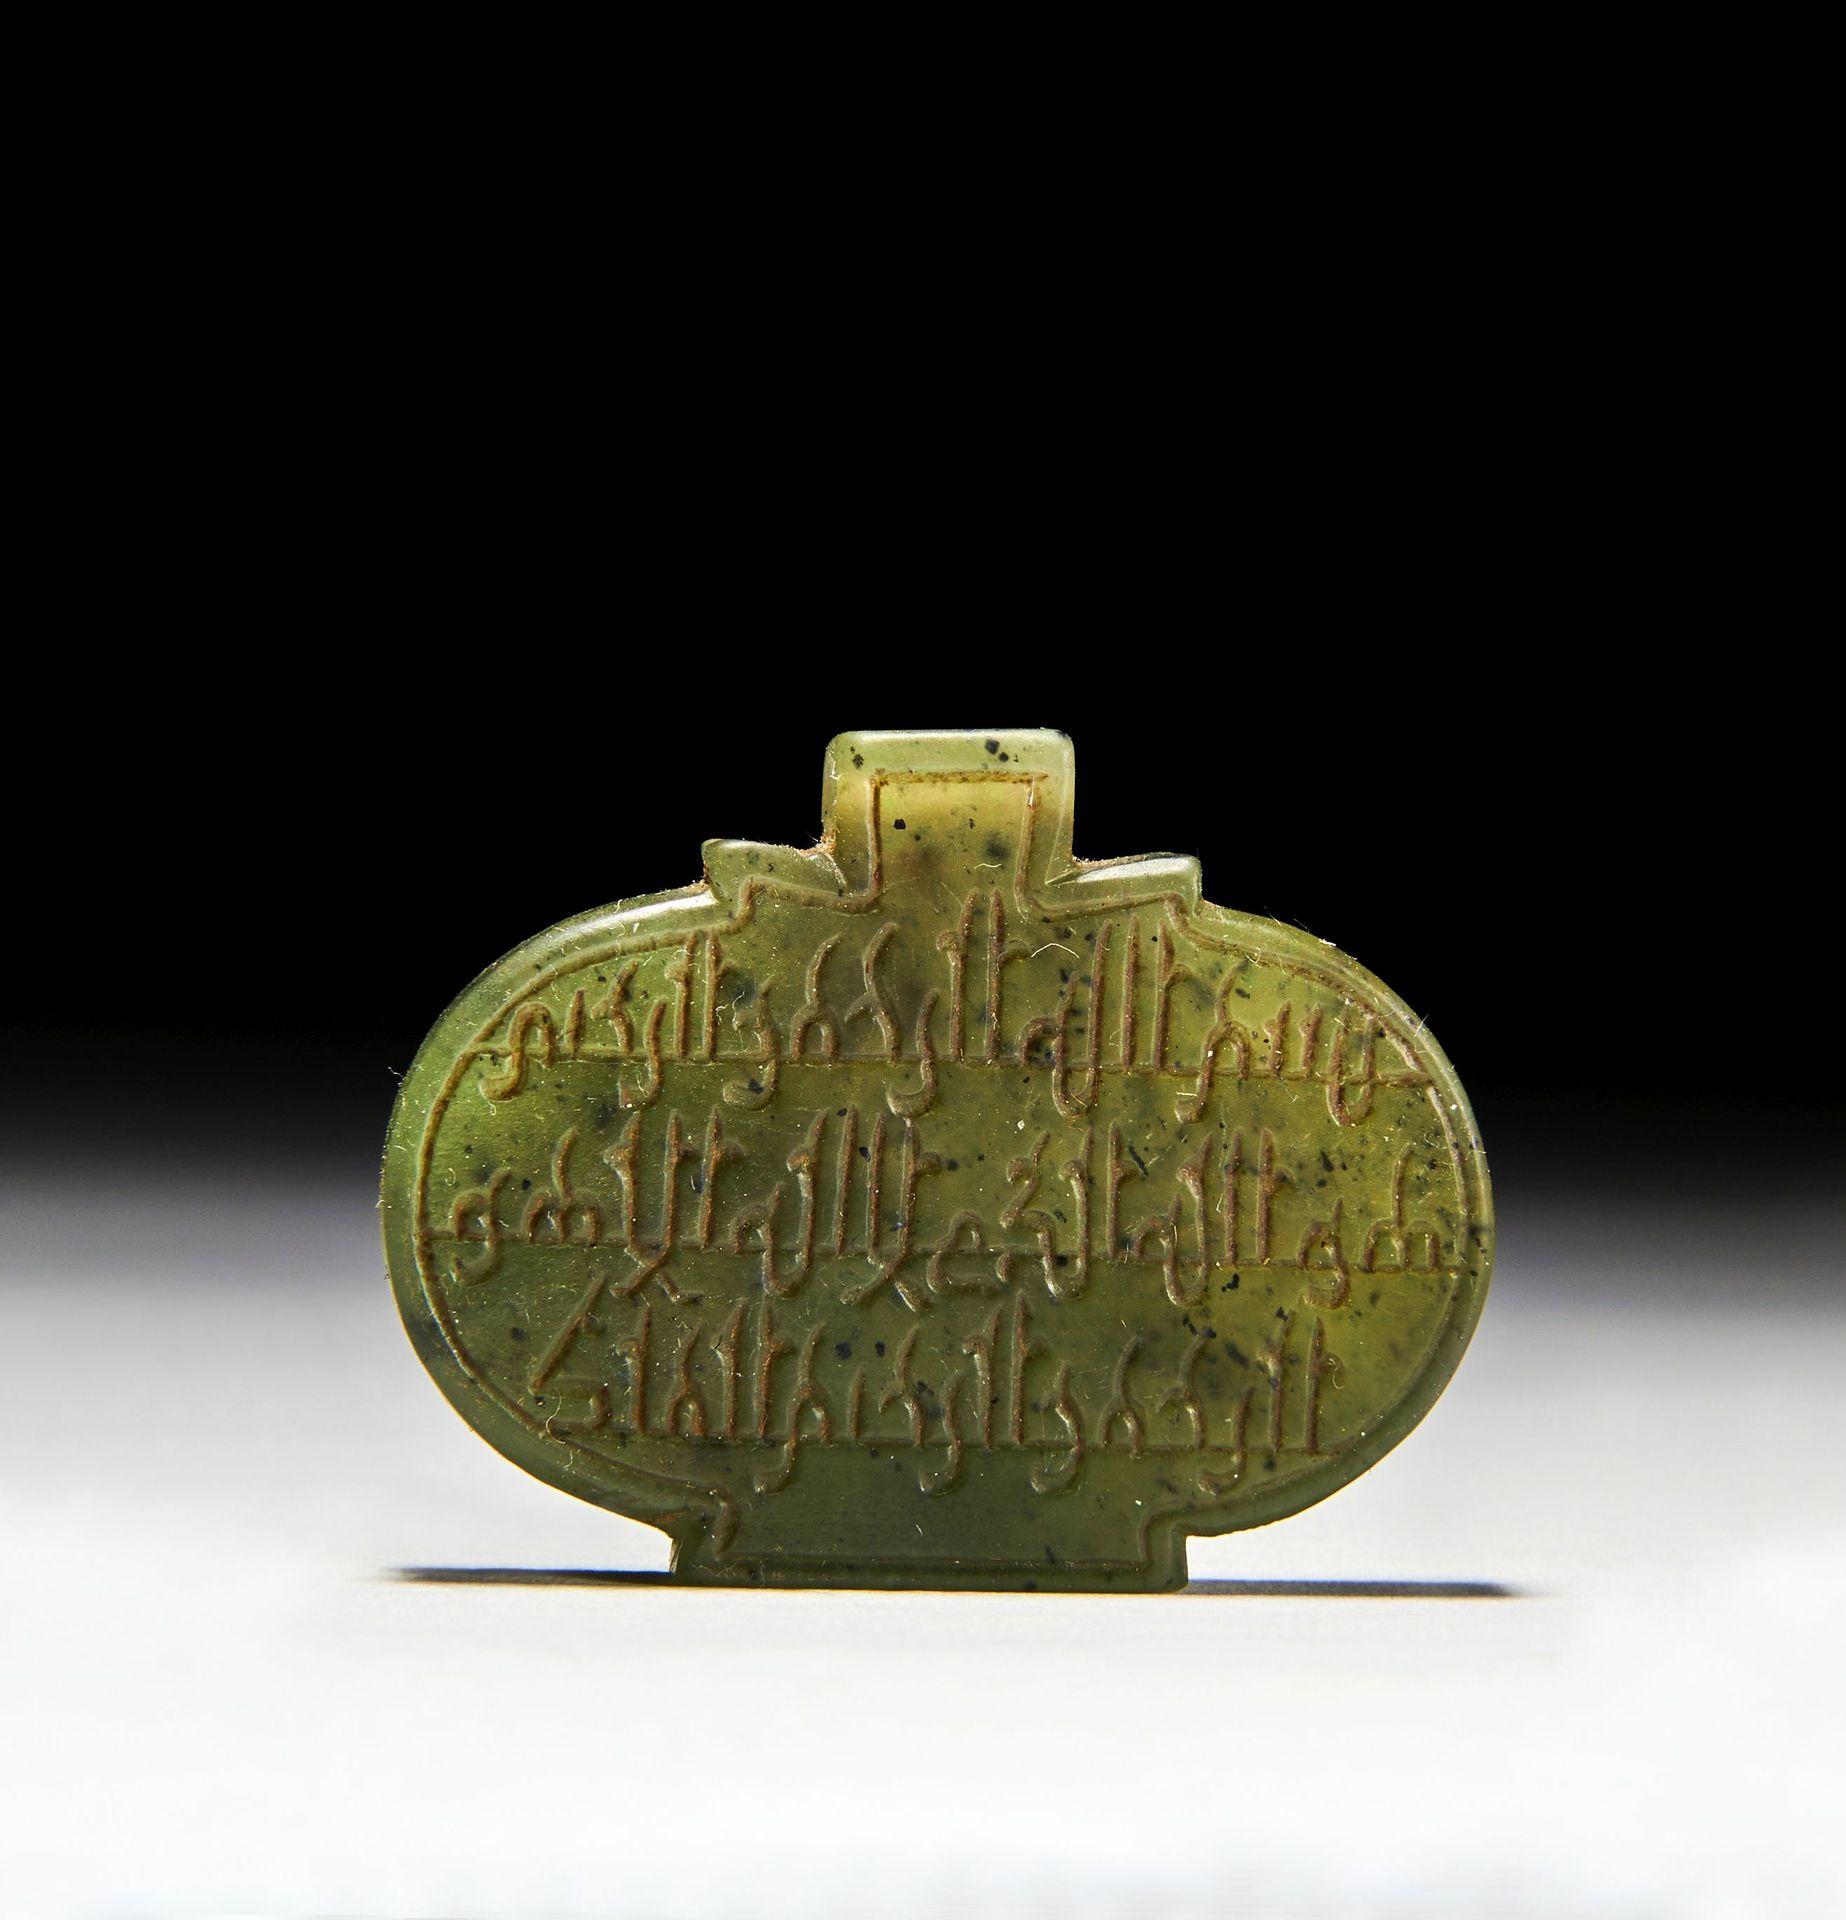 AN ISLAMIC JADE INSCRIBED PENDANT IN KUFIC STYLE TEXT, 19TH CENTURY, PERSIA COLG&hellip;